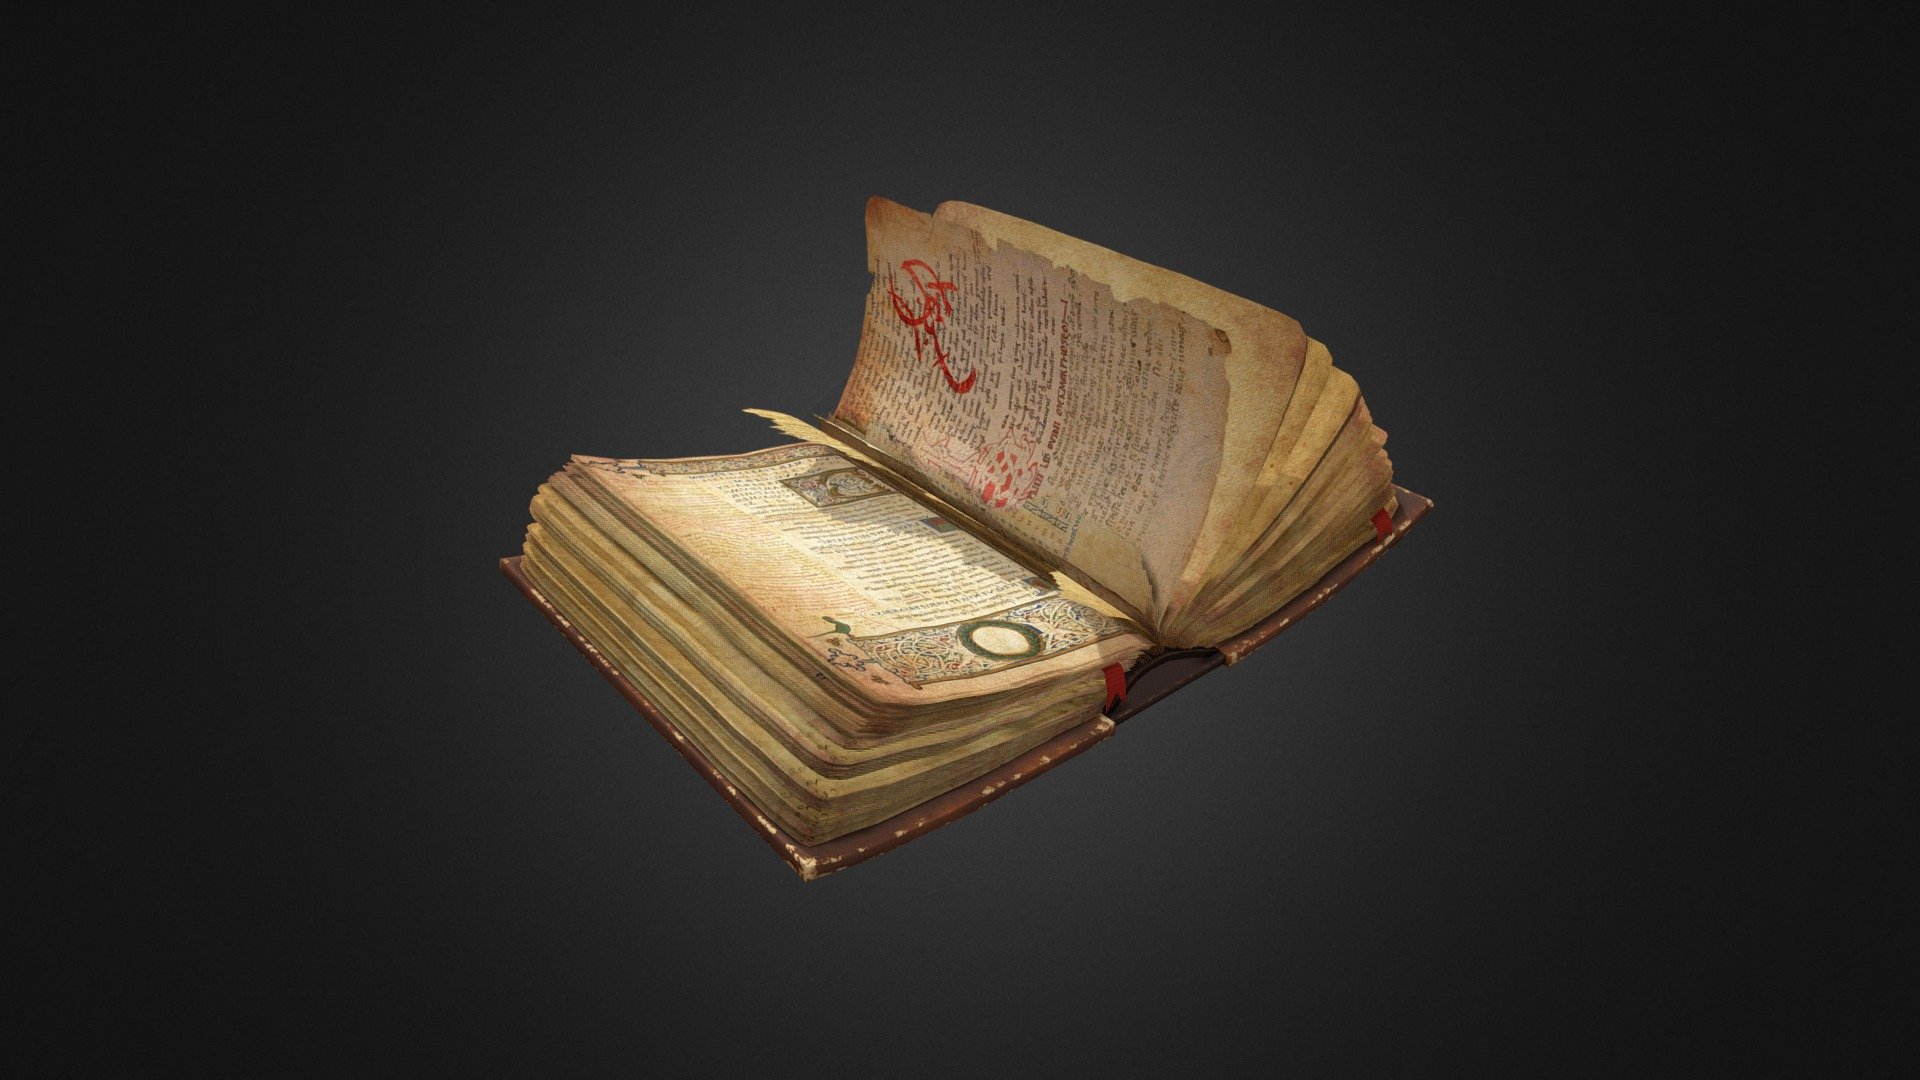 The real time version of the book that I modelled for the project Magic Book. The project can be viewed at: https://amadjunaid.artstation.com/projects/g2xPBm - Old Medieval Book - 3D model by Amad Junaid (@amadjunaid) 3d model